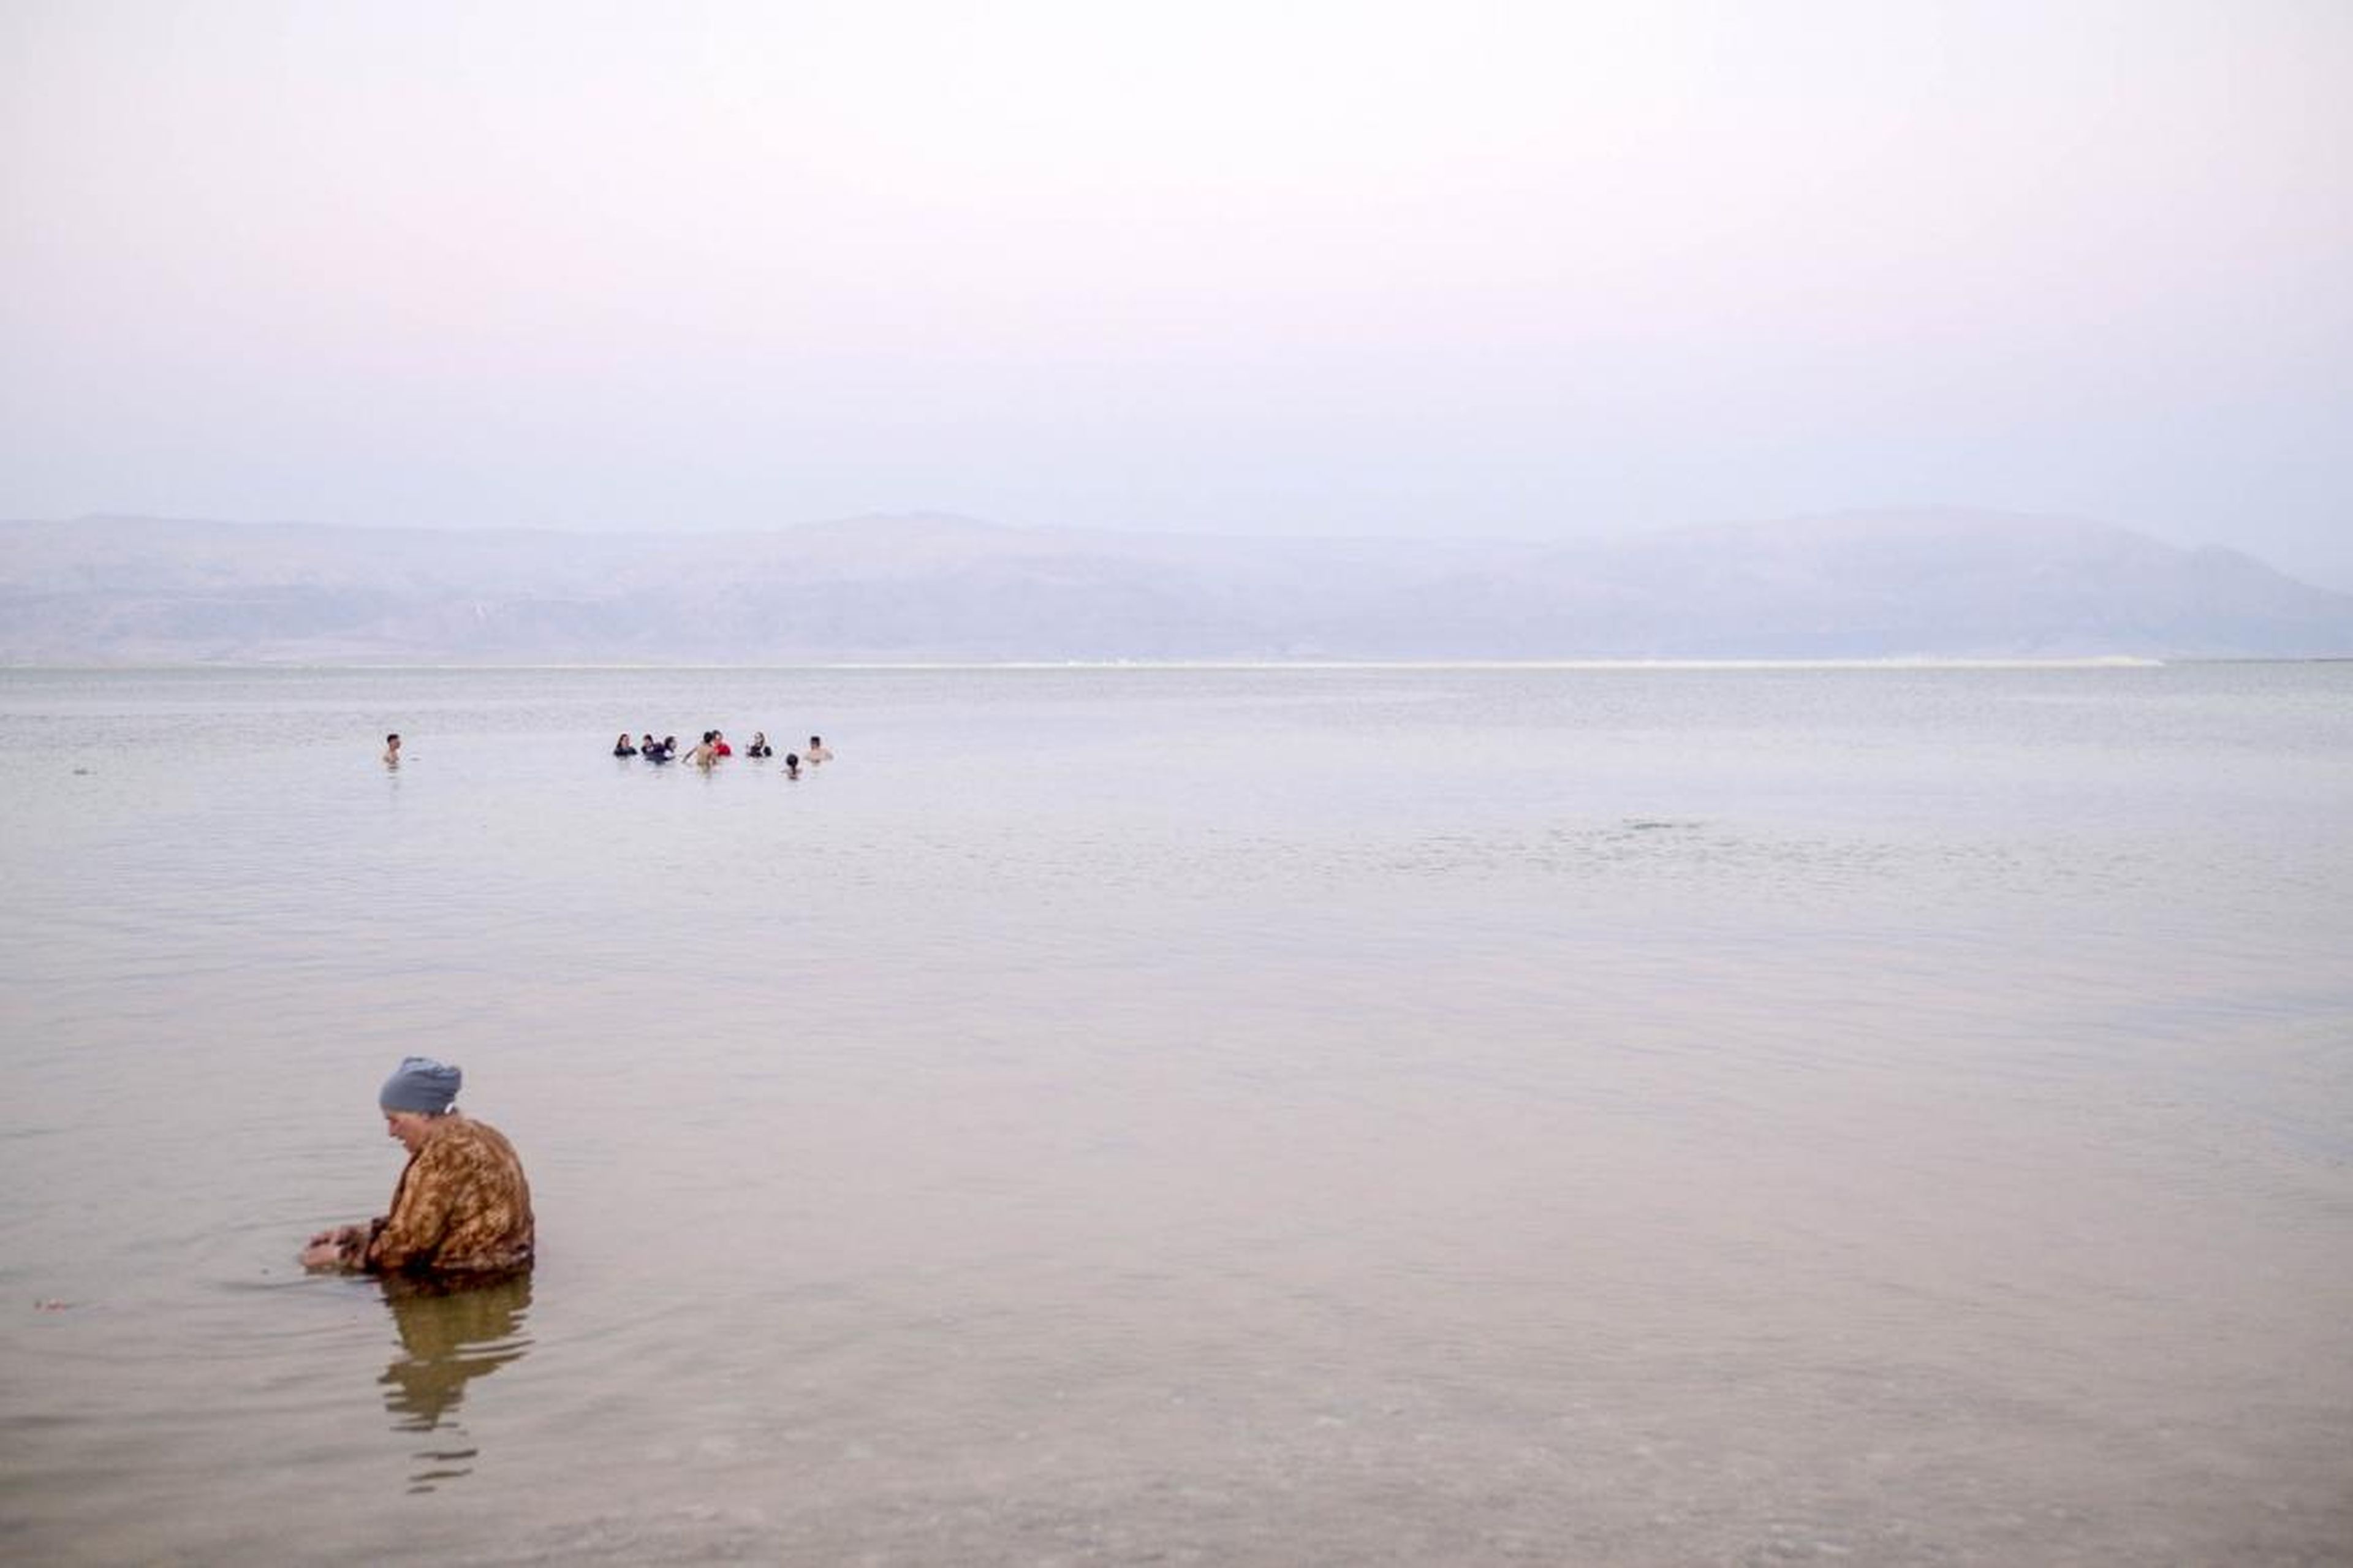 The Dead Sea and the surrounding landscape was undoubtedly beautiful, particularly at sunrise and sunset.